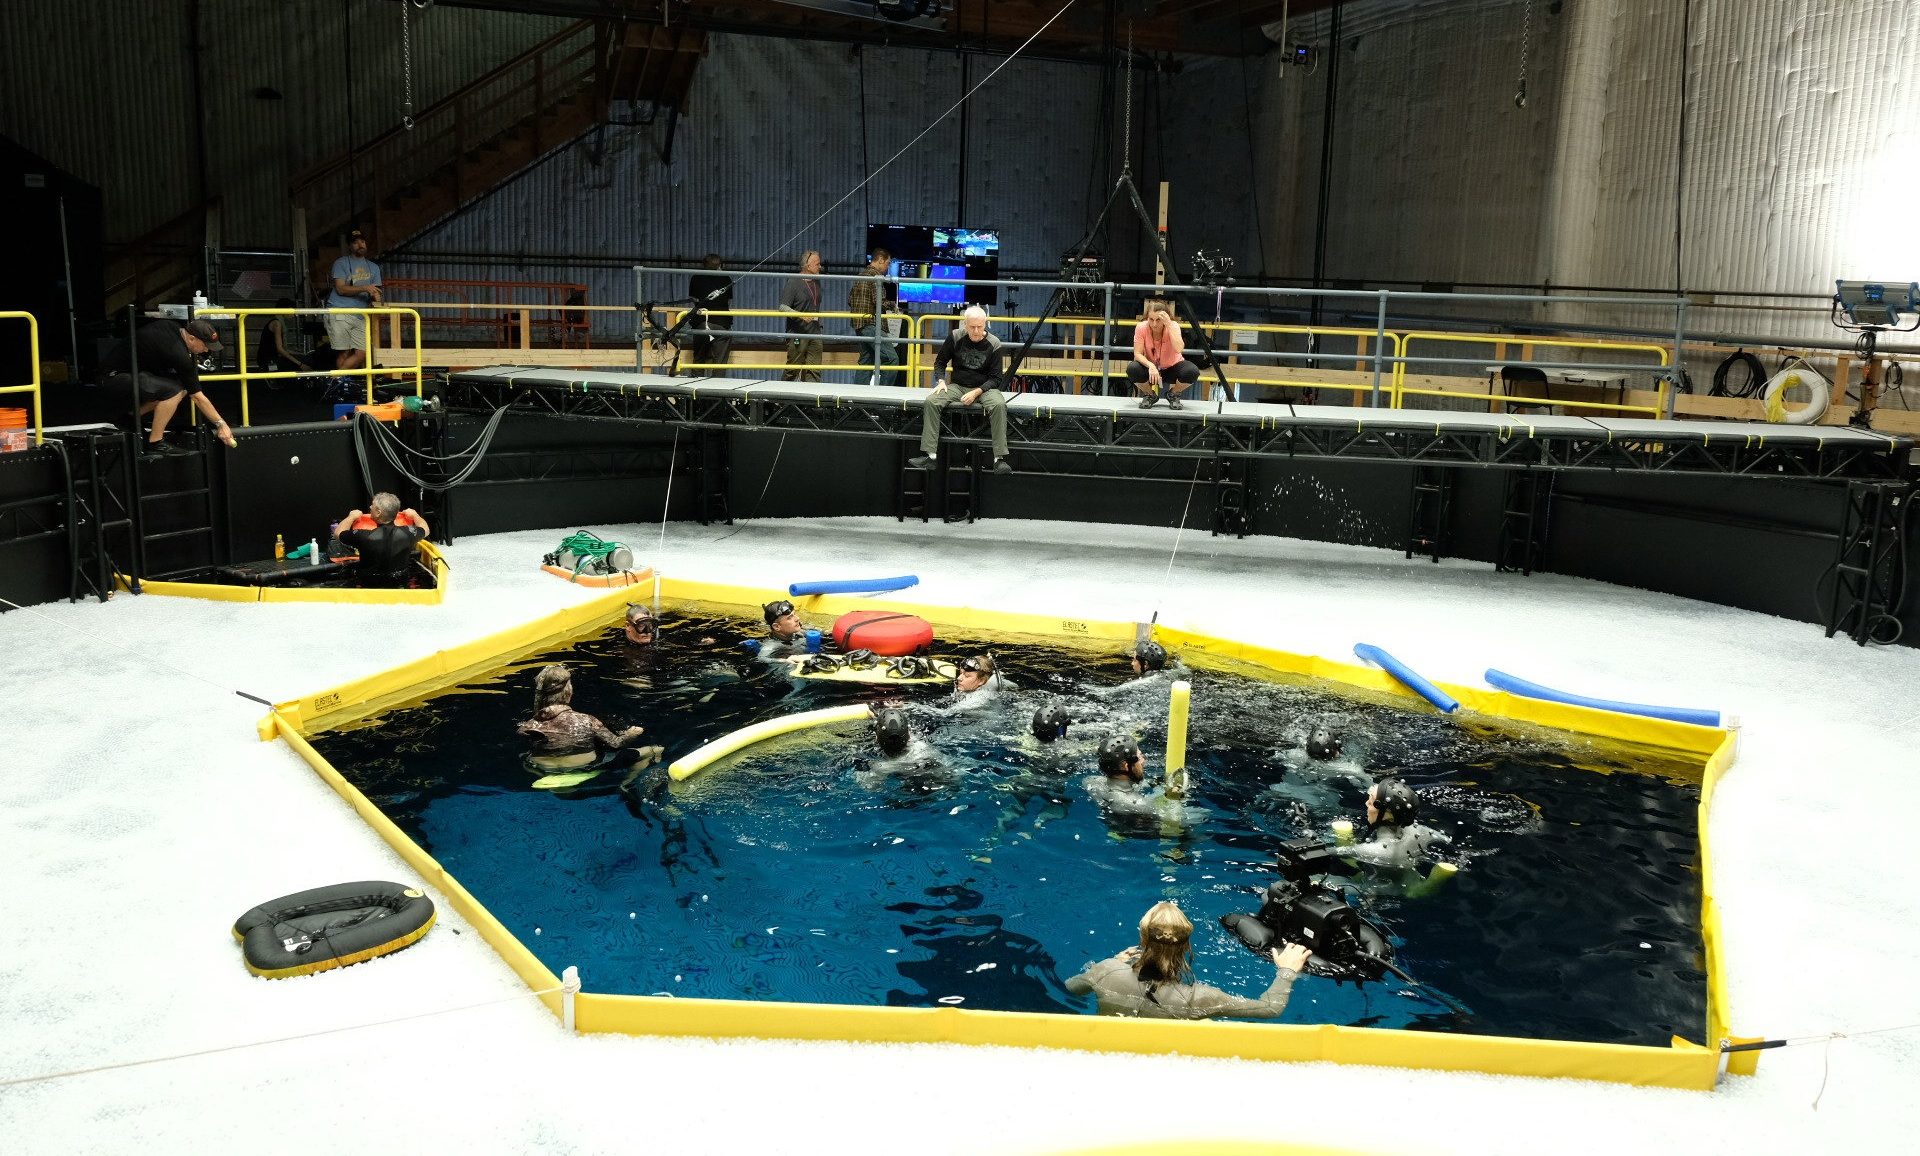 A movie set with a pool of water with people in it